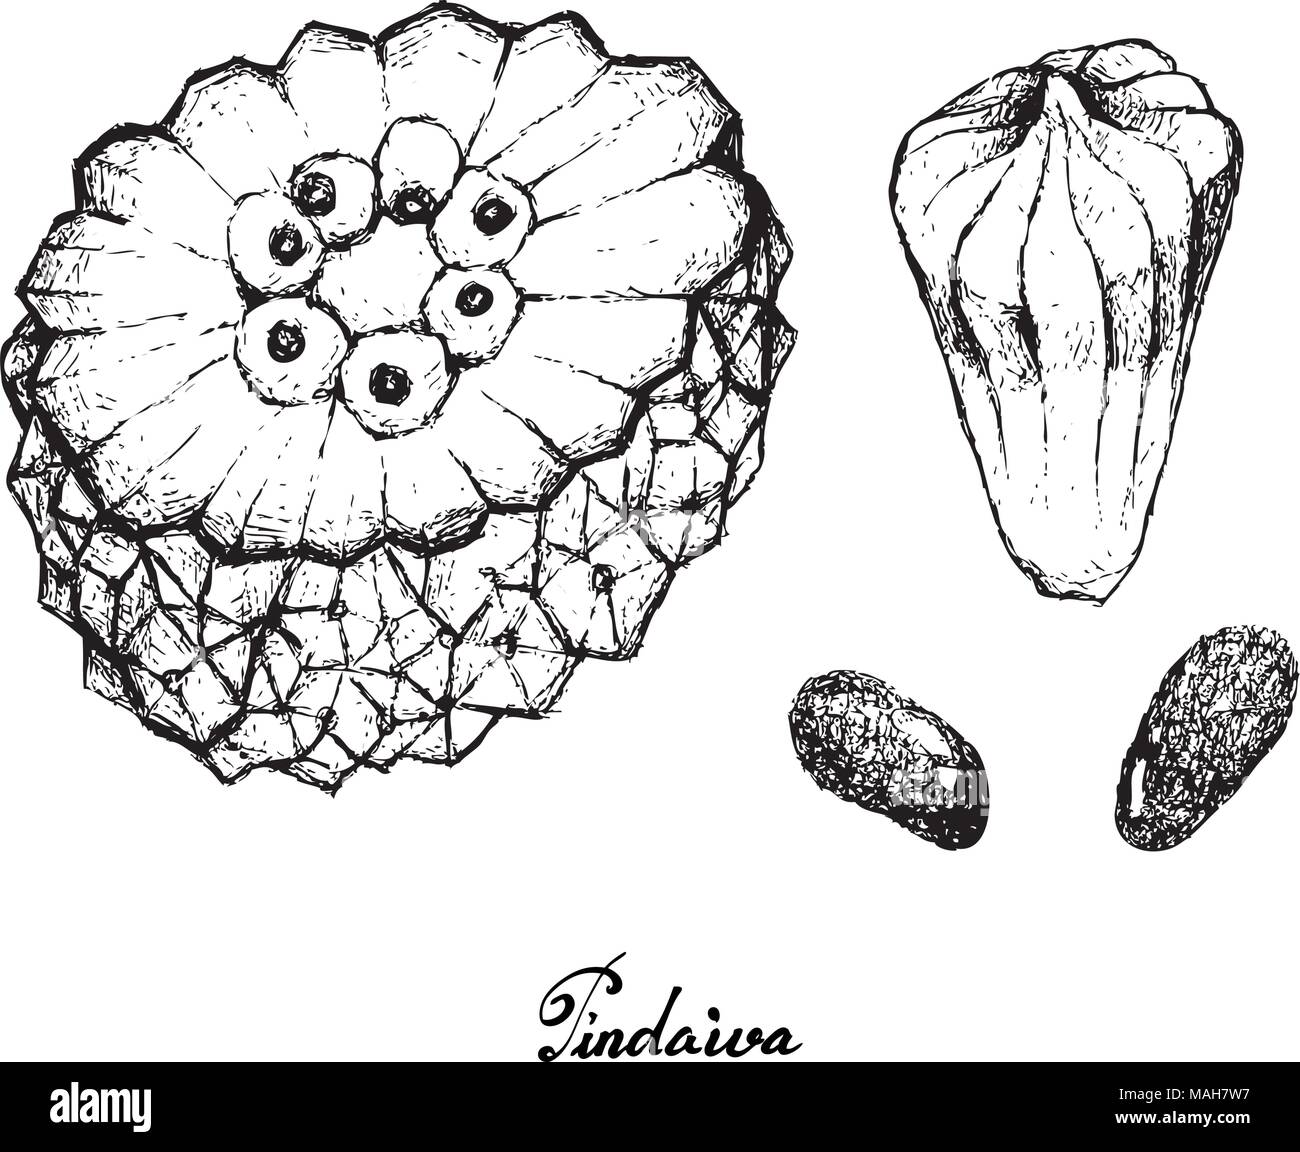 Exotic Fruit, Illustration Hand Drawn Sketch of Pindaiva, Pindaiba, Pindauva or Perovana Fruits Isolated on White Background. Stock Vector